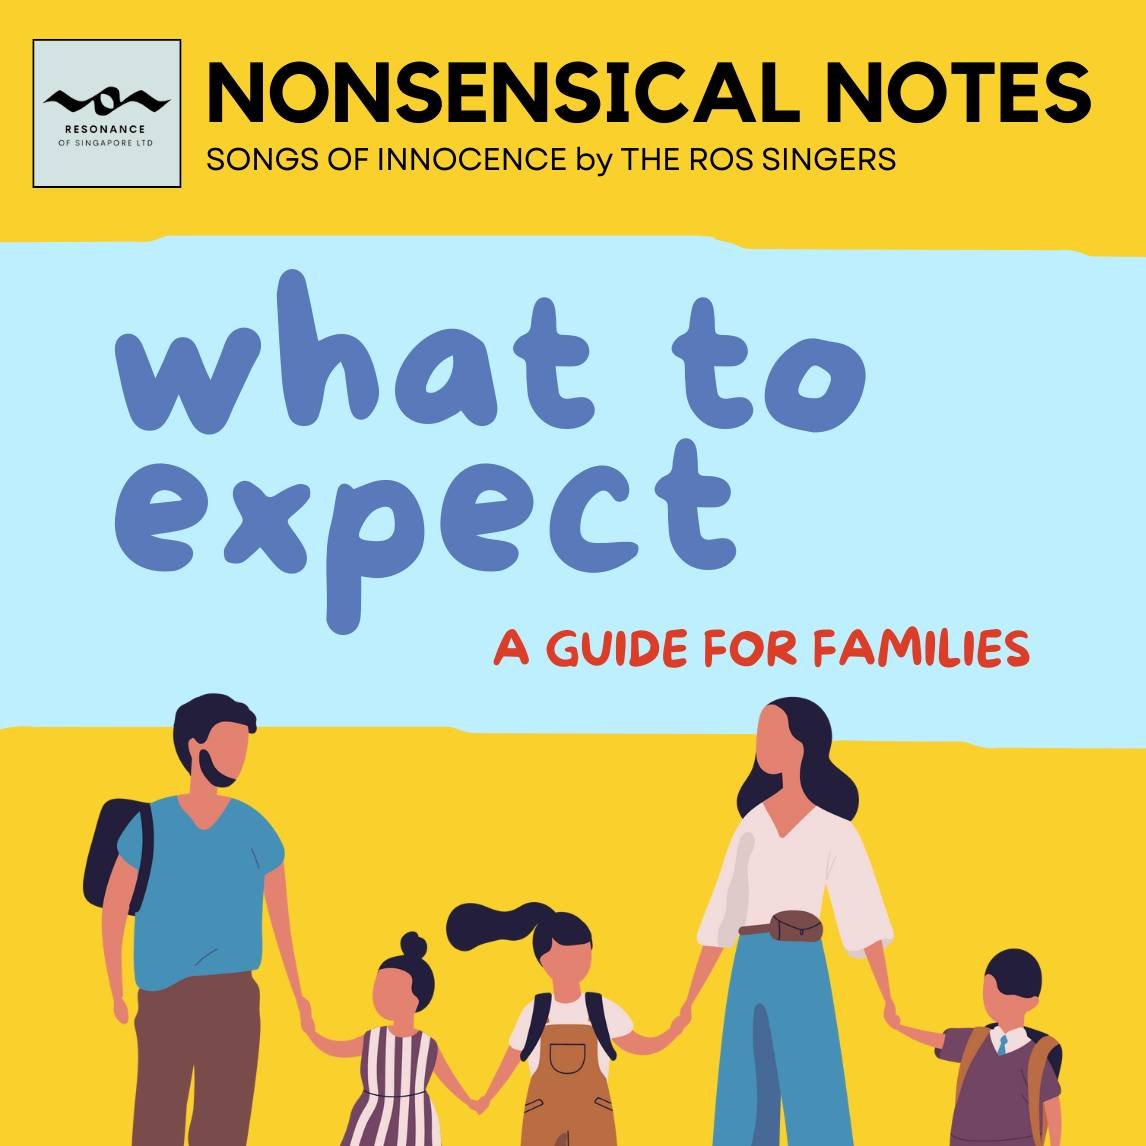 Did you know that NONSENSICAL NOTES is ROS's first all-age, child-friendly concert? And when we say all-age, we really do mean all-age. There's nothing better than a fun and educational day out with your family - so bring your young, younger, and you